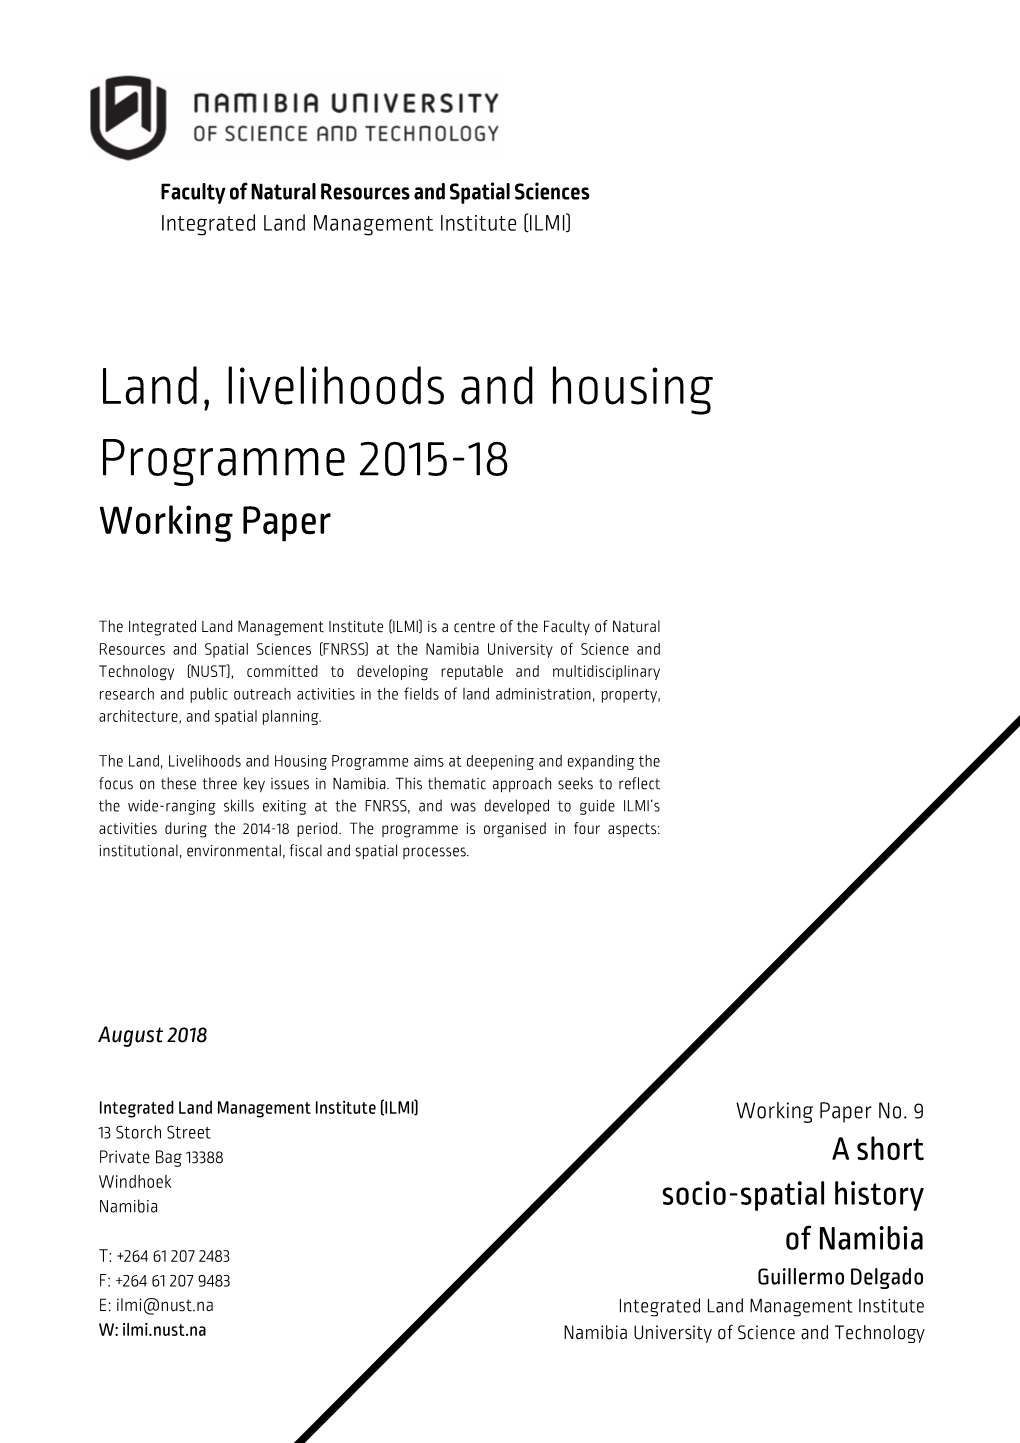 Land, Livelihoods and Housing Programme 2015-18 Working Paper